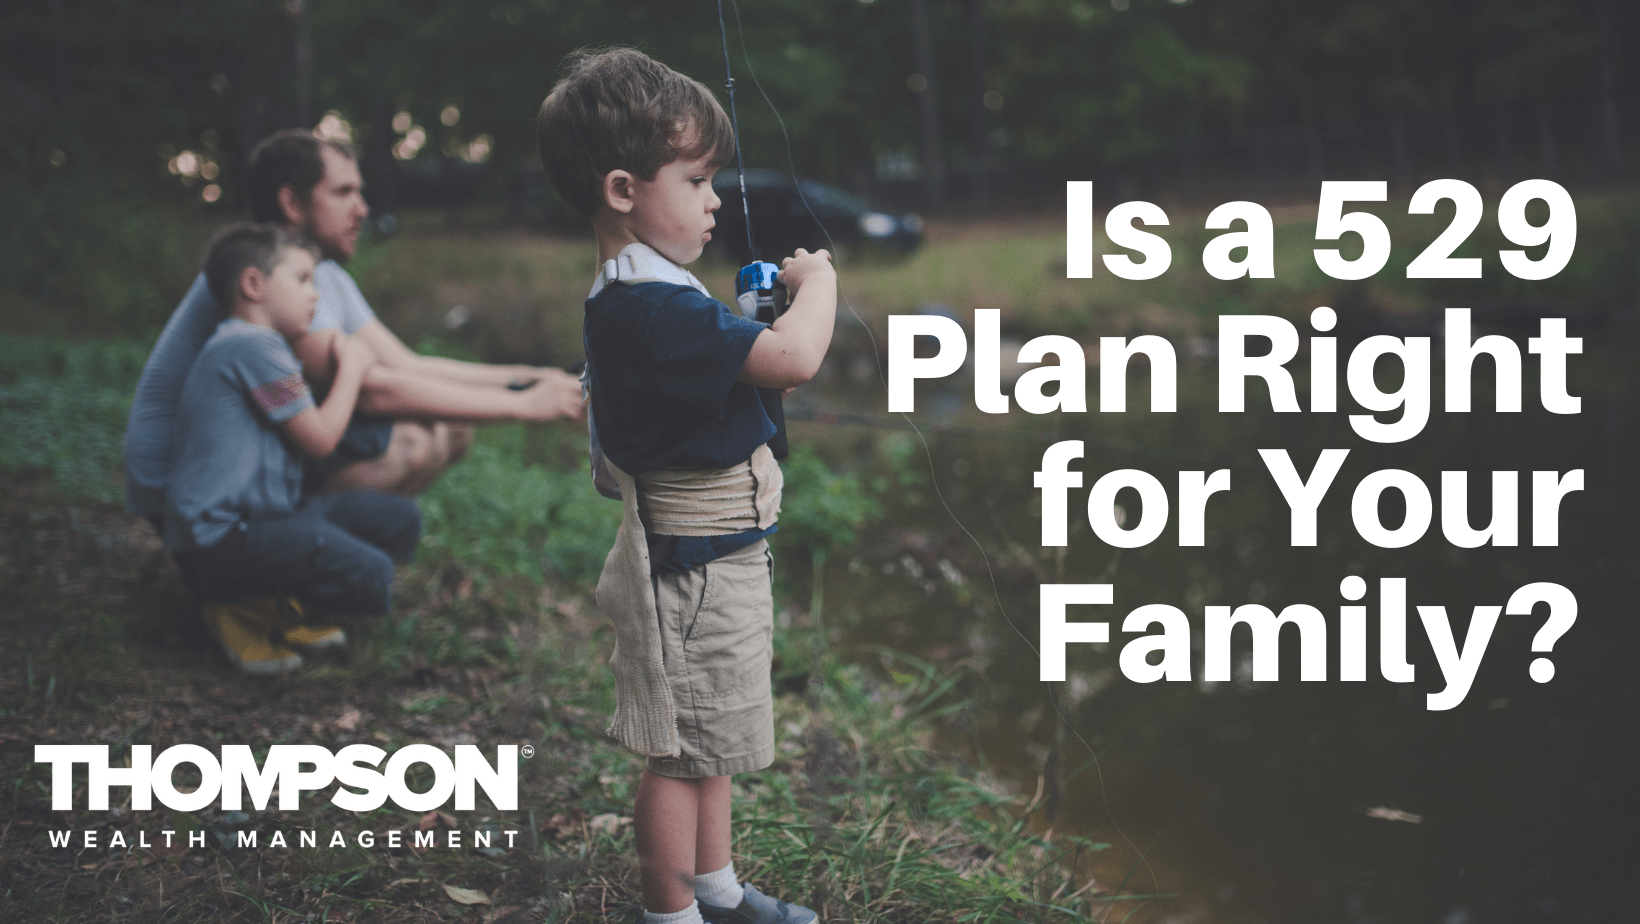 Is a 529 Plan Right for Your Family?